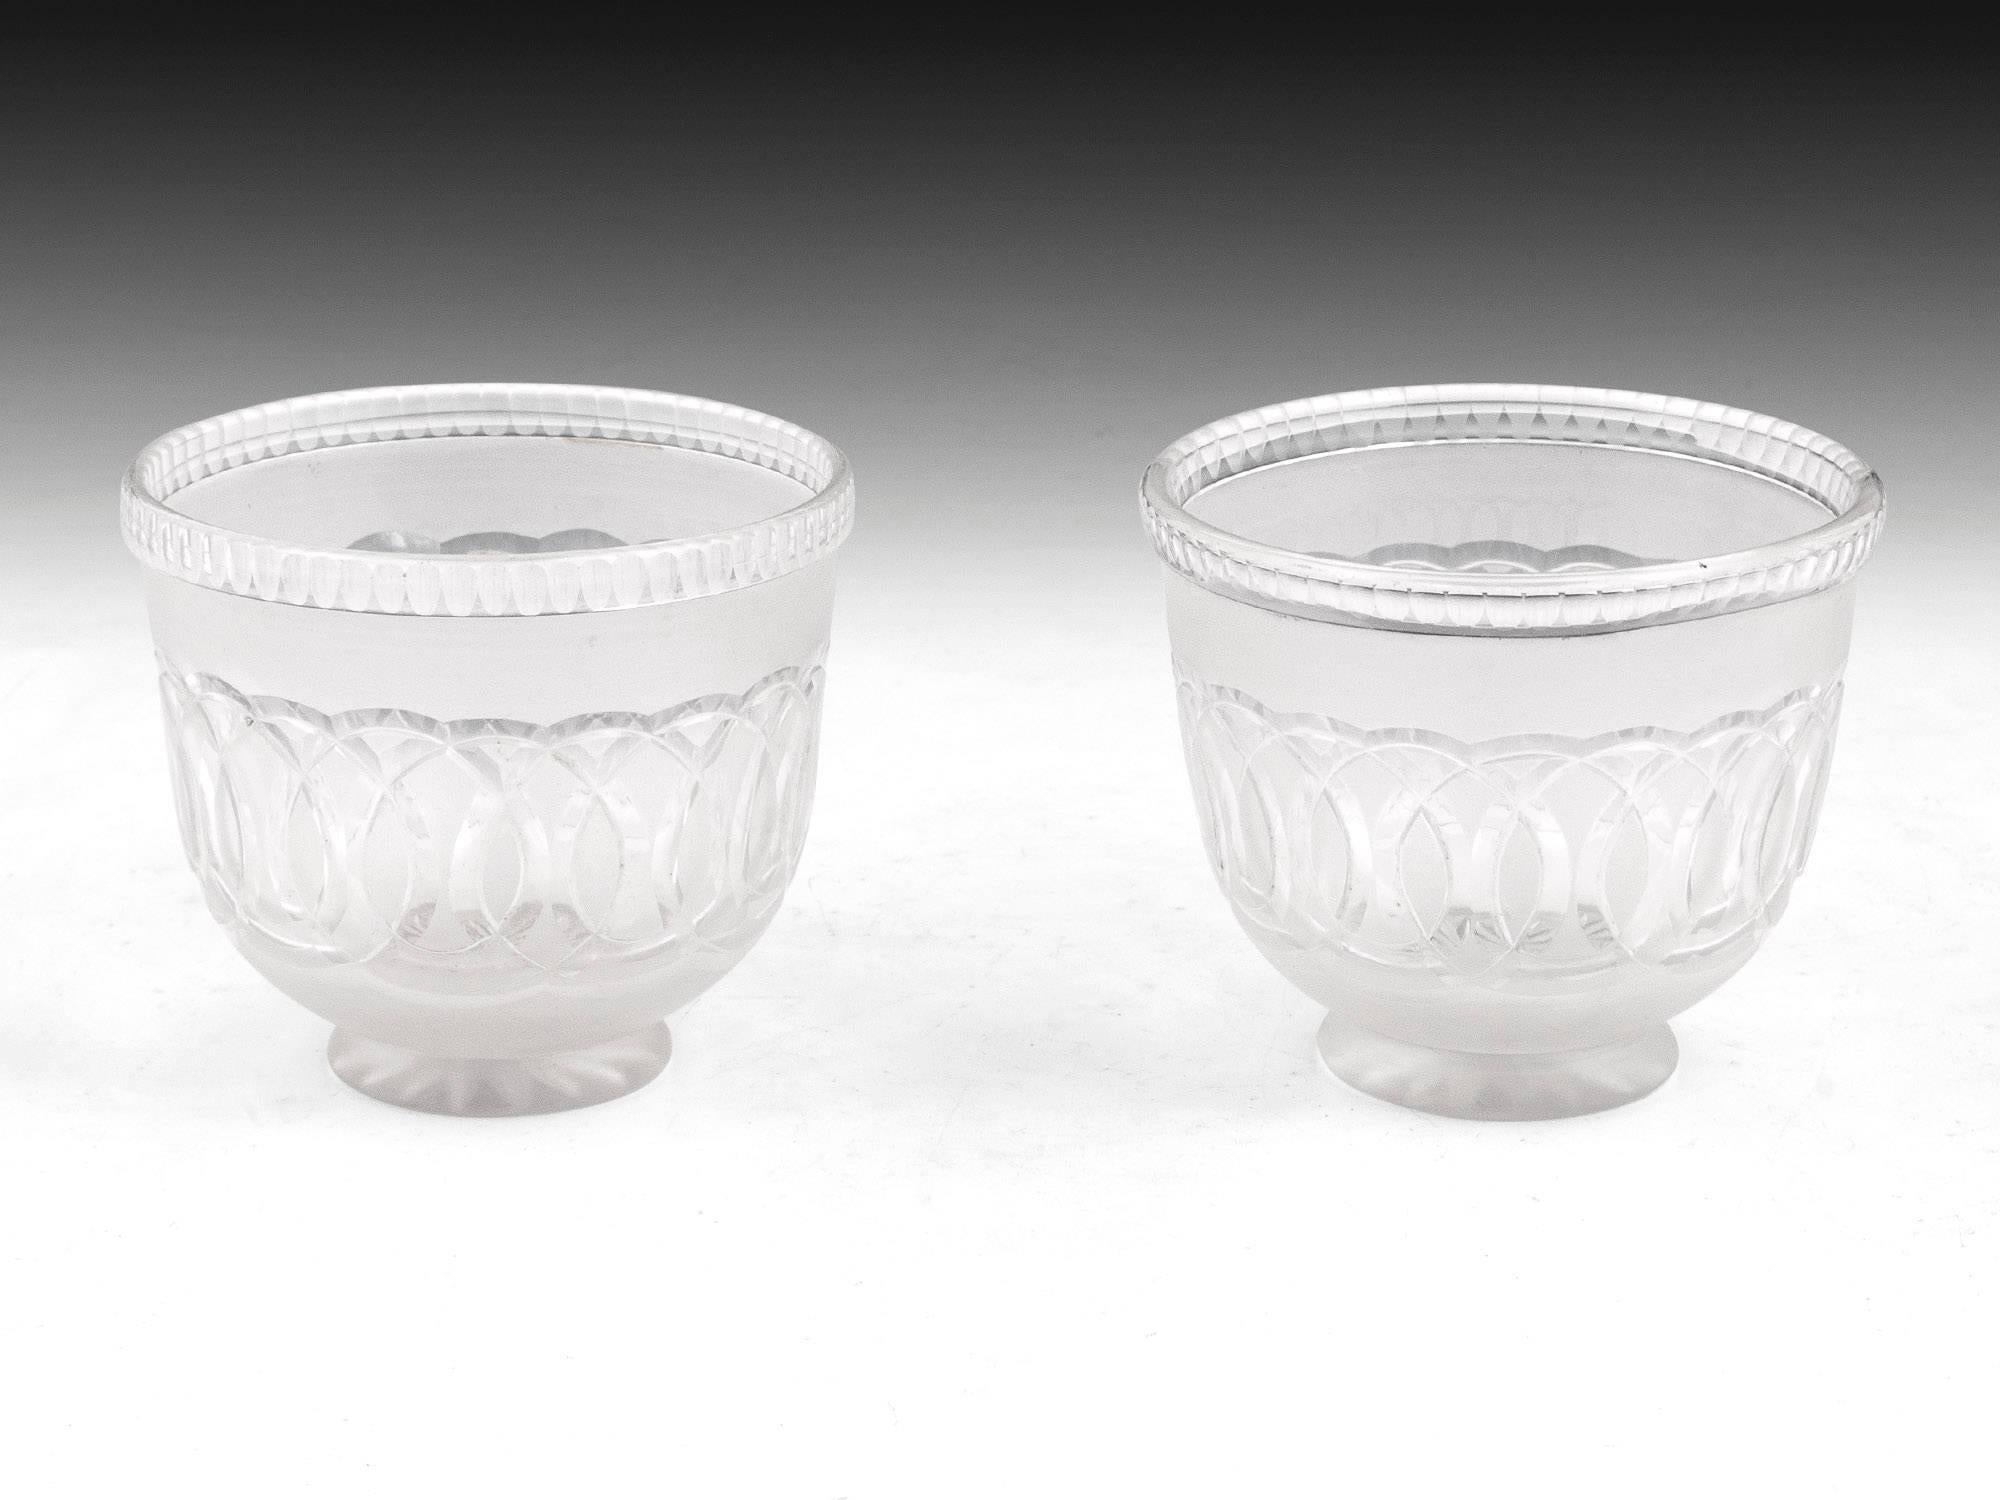 Pair of Regency cut-glass tea caddy mixing bowls with interesting linked circle engraving.